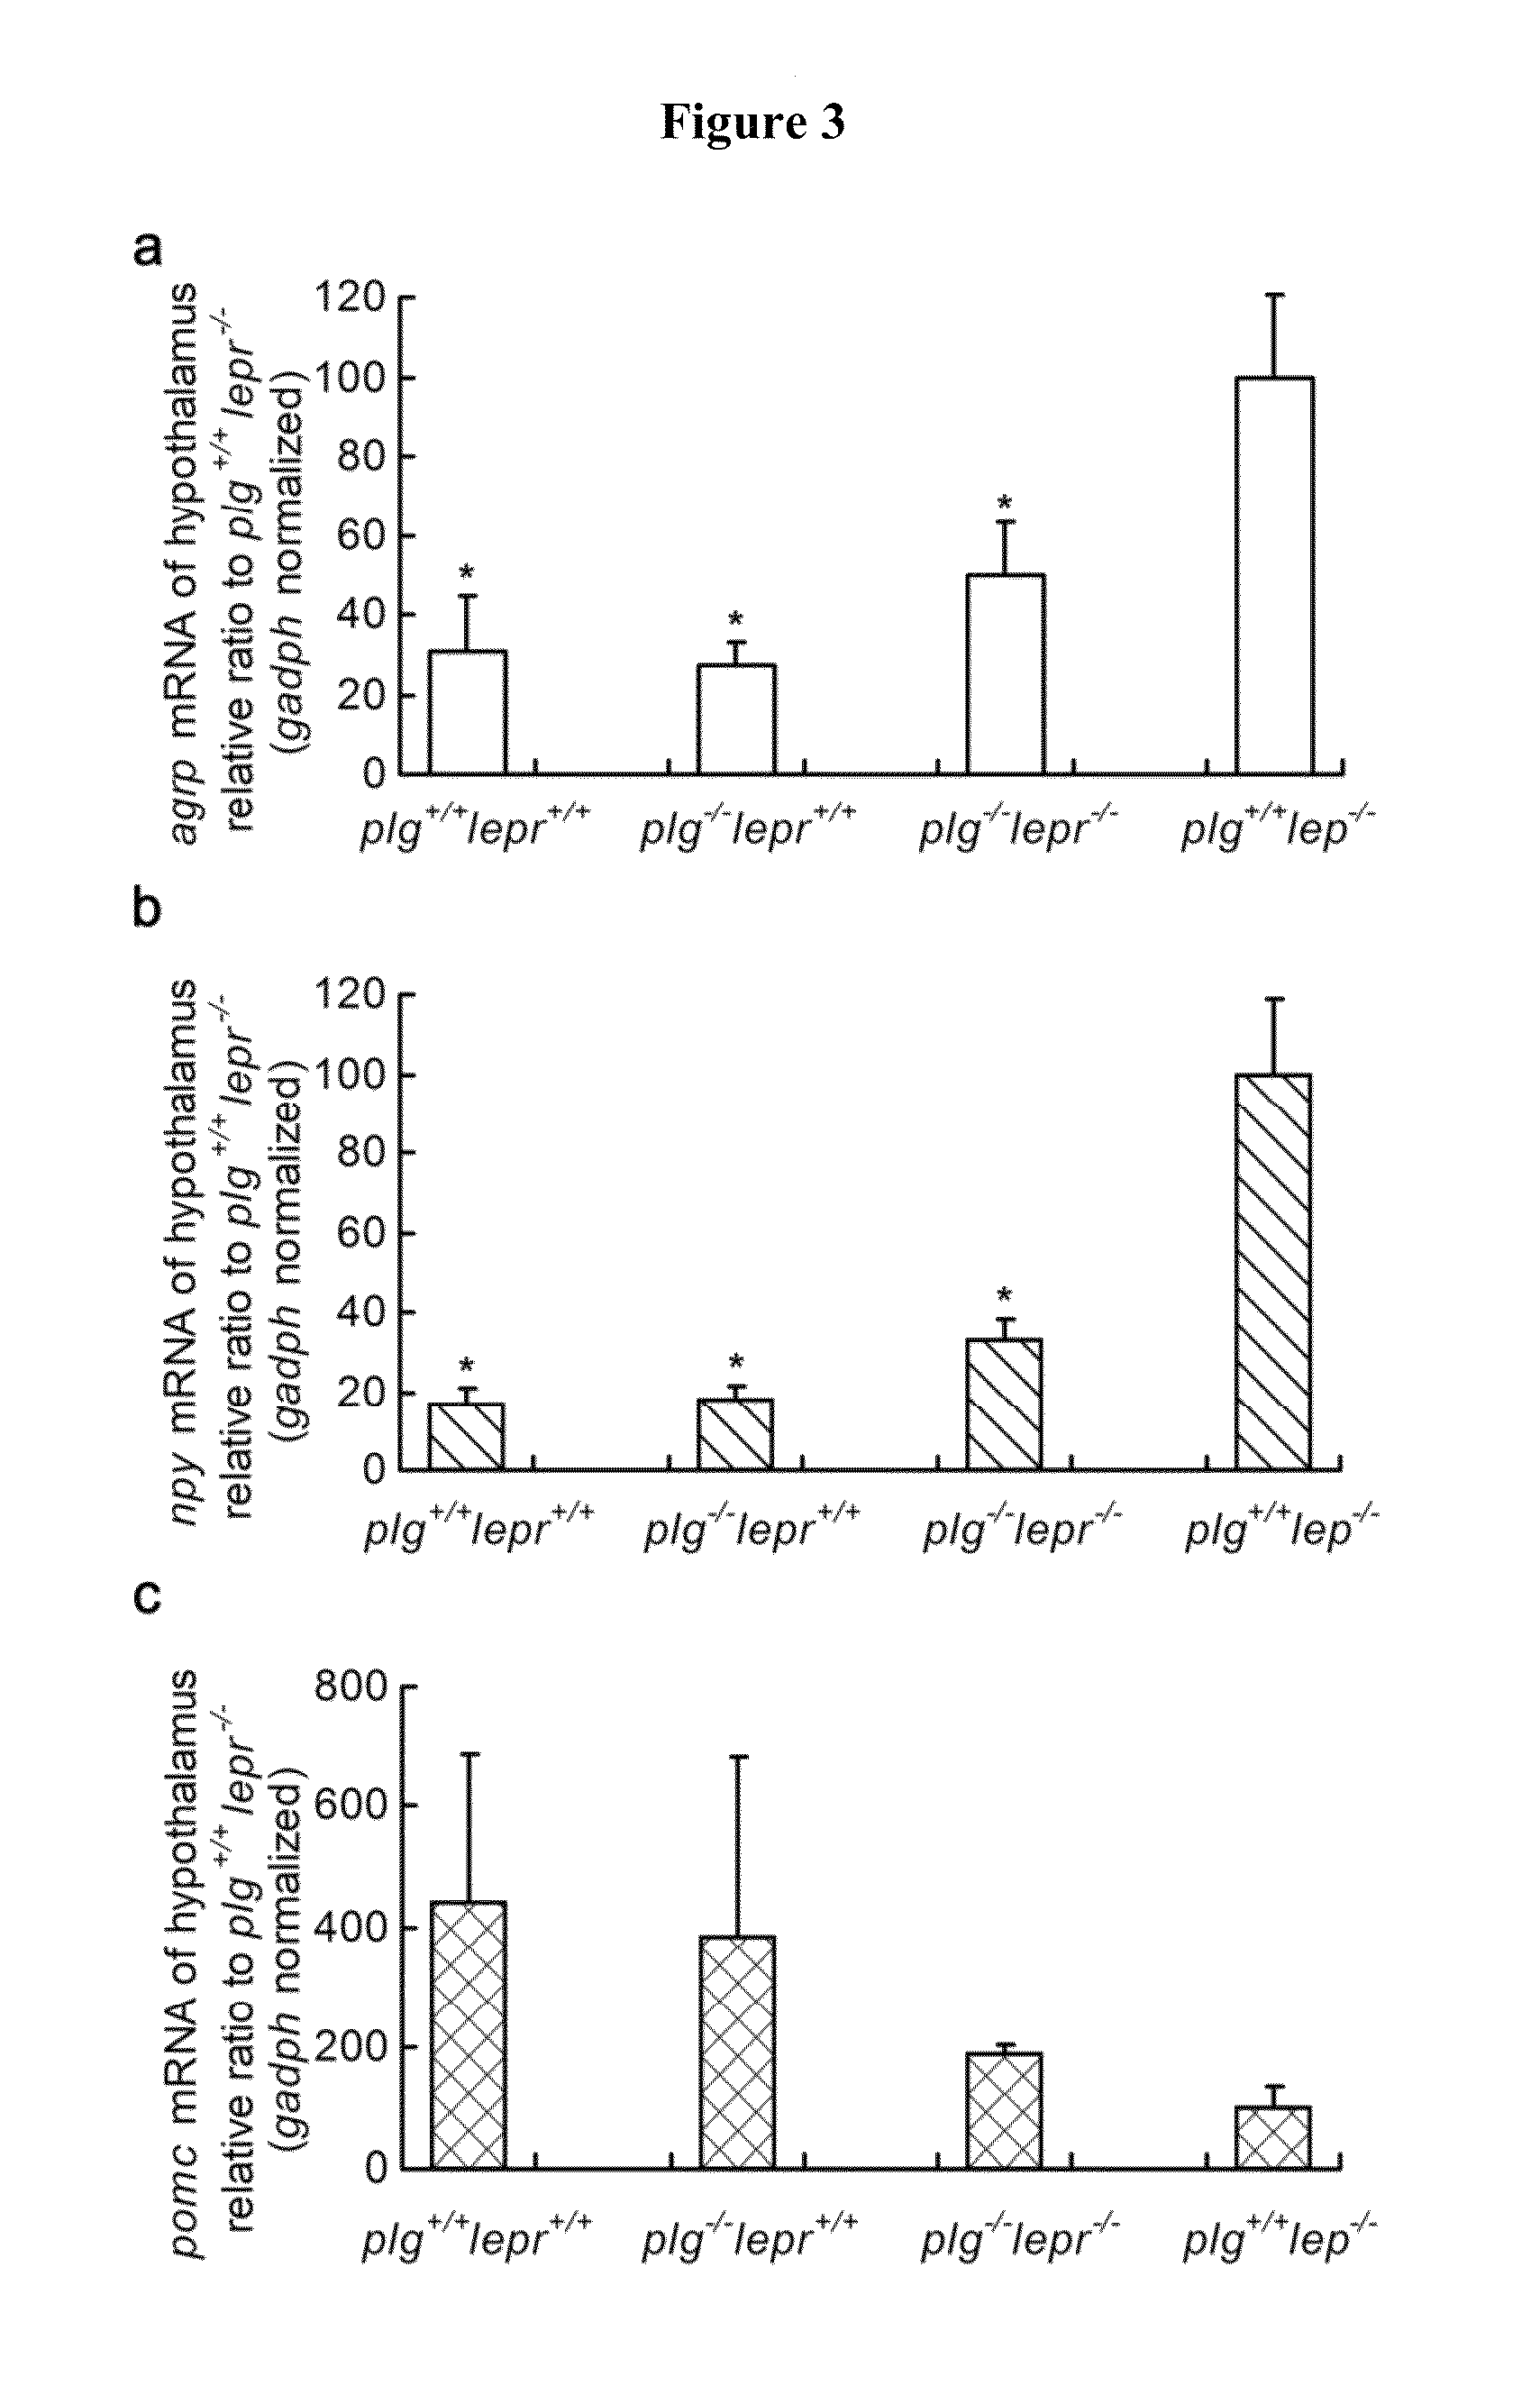 Plasma anti-diabetic NUCB2 peptide (pladin) and uses thereof